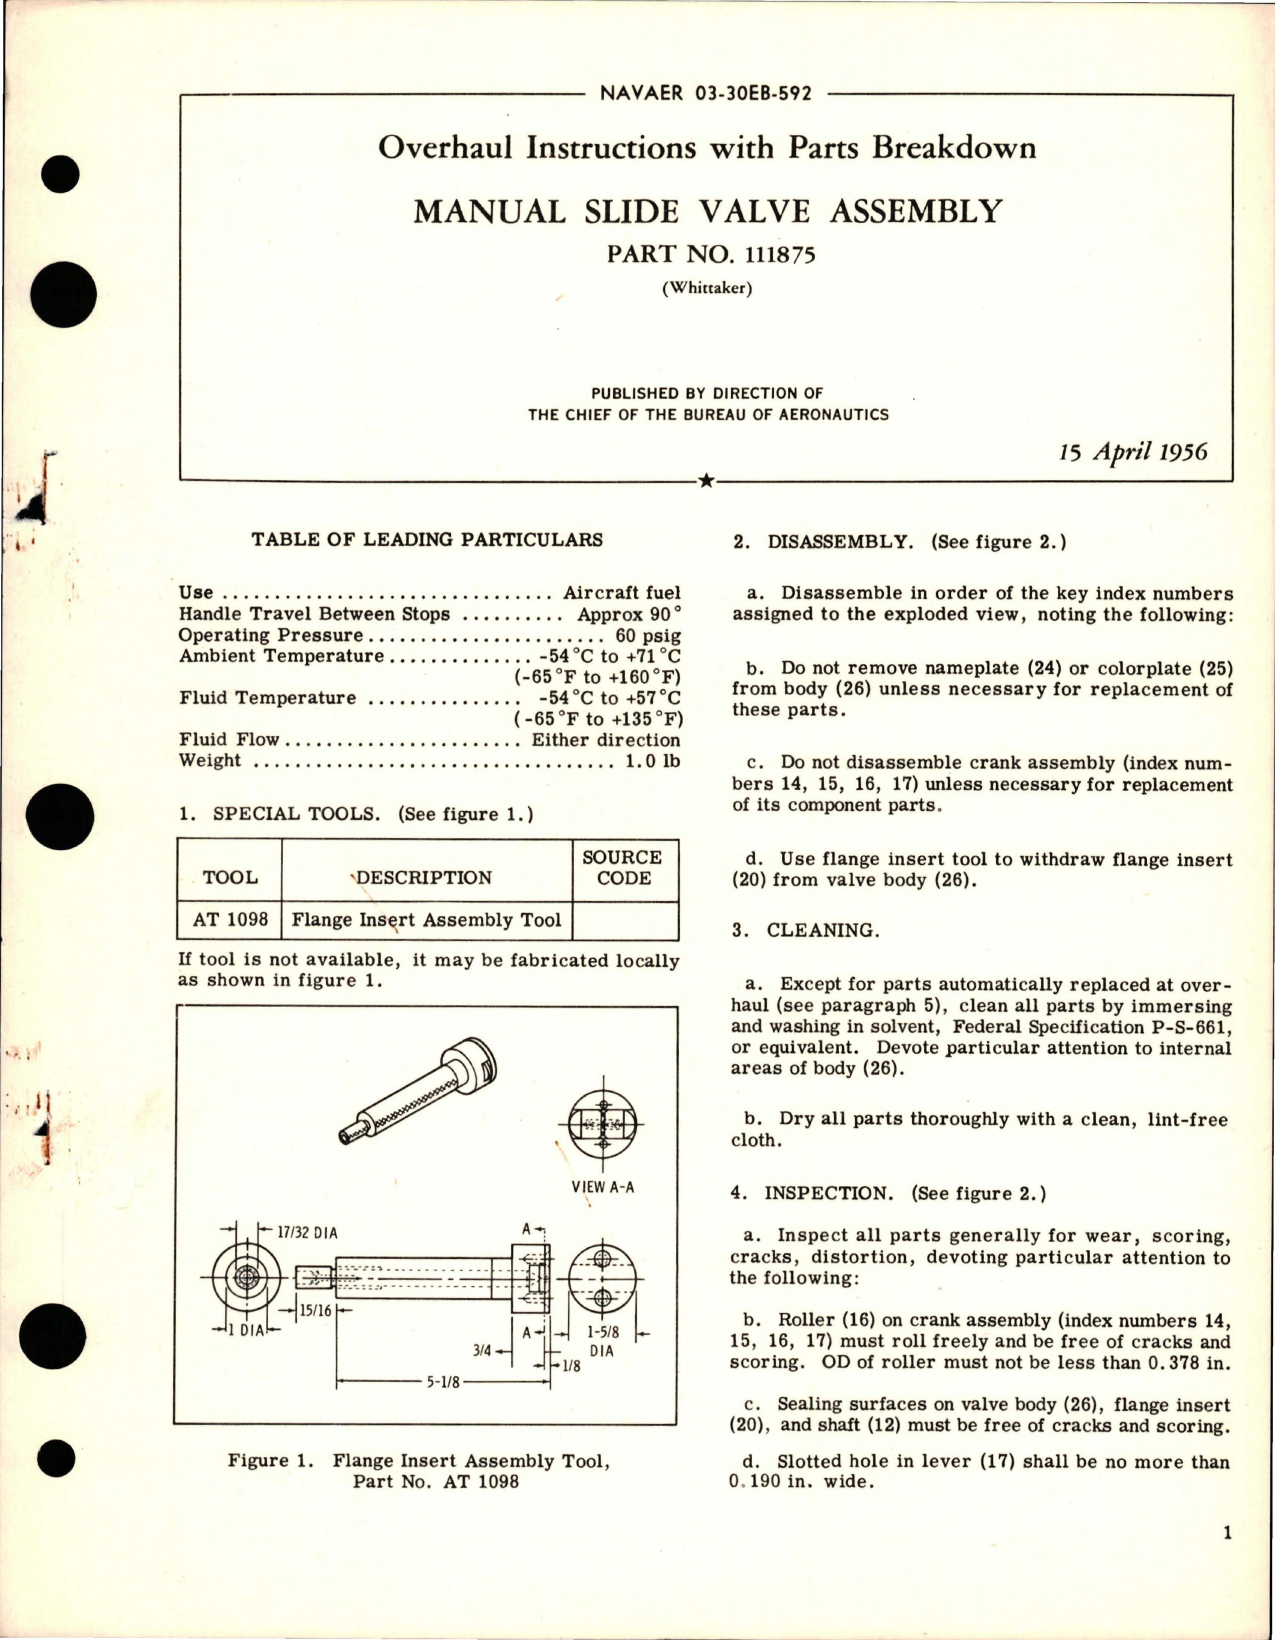 Sample page 1 from AirCorps Library document: Overhaul Instructions with Parts Breakdown for Manual Slide Valve Assembly - Part 111875